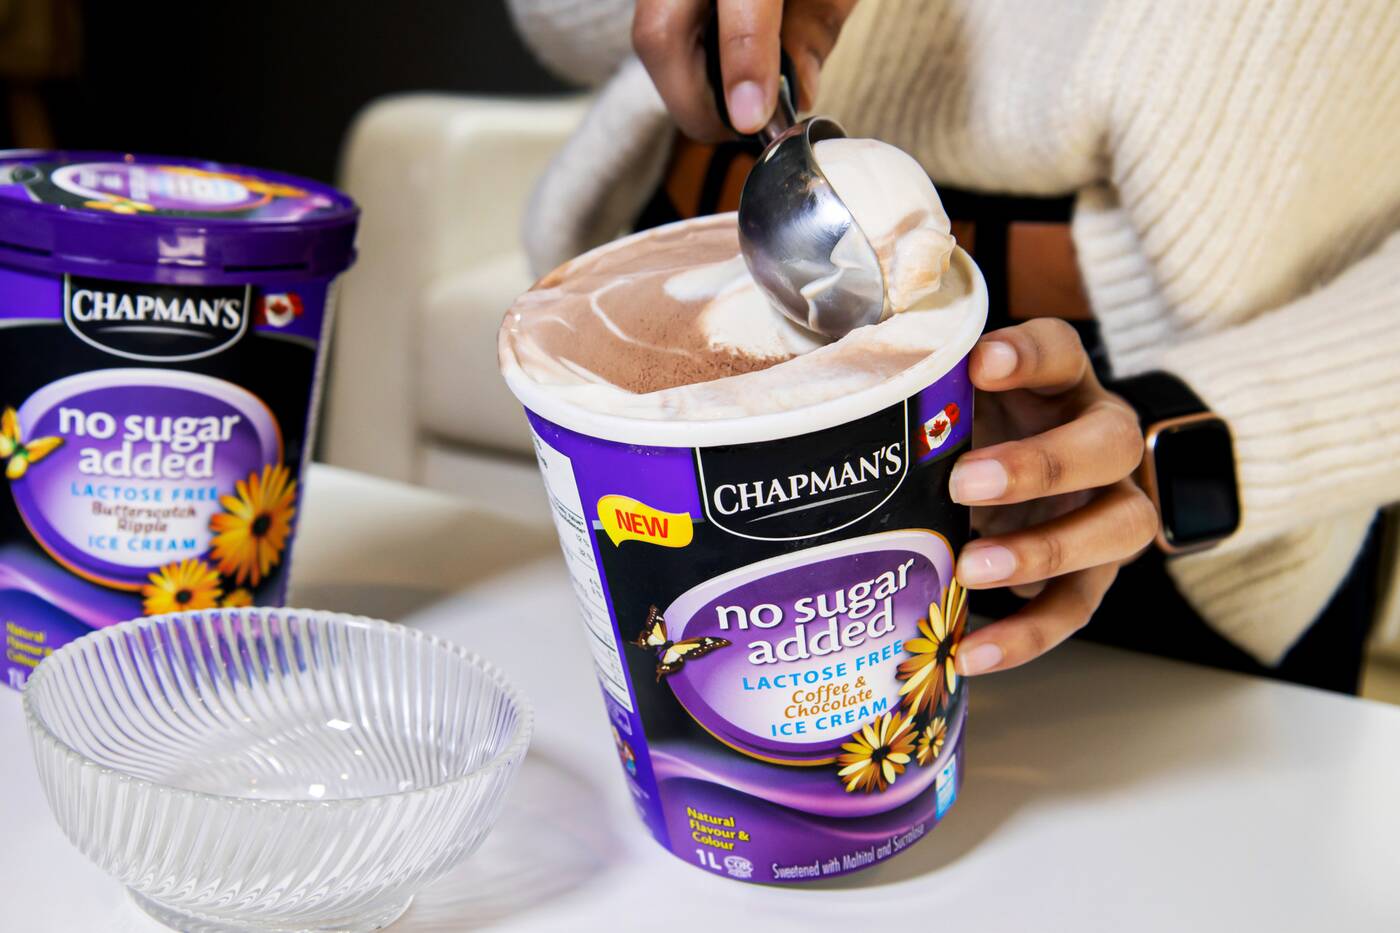 Chapman's Ice Cream has 10 new flavours based on thousands of